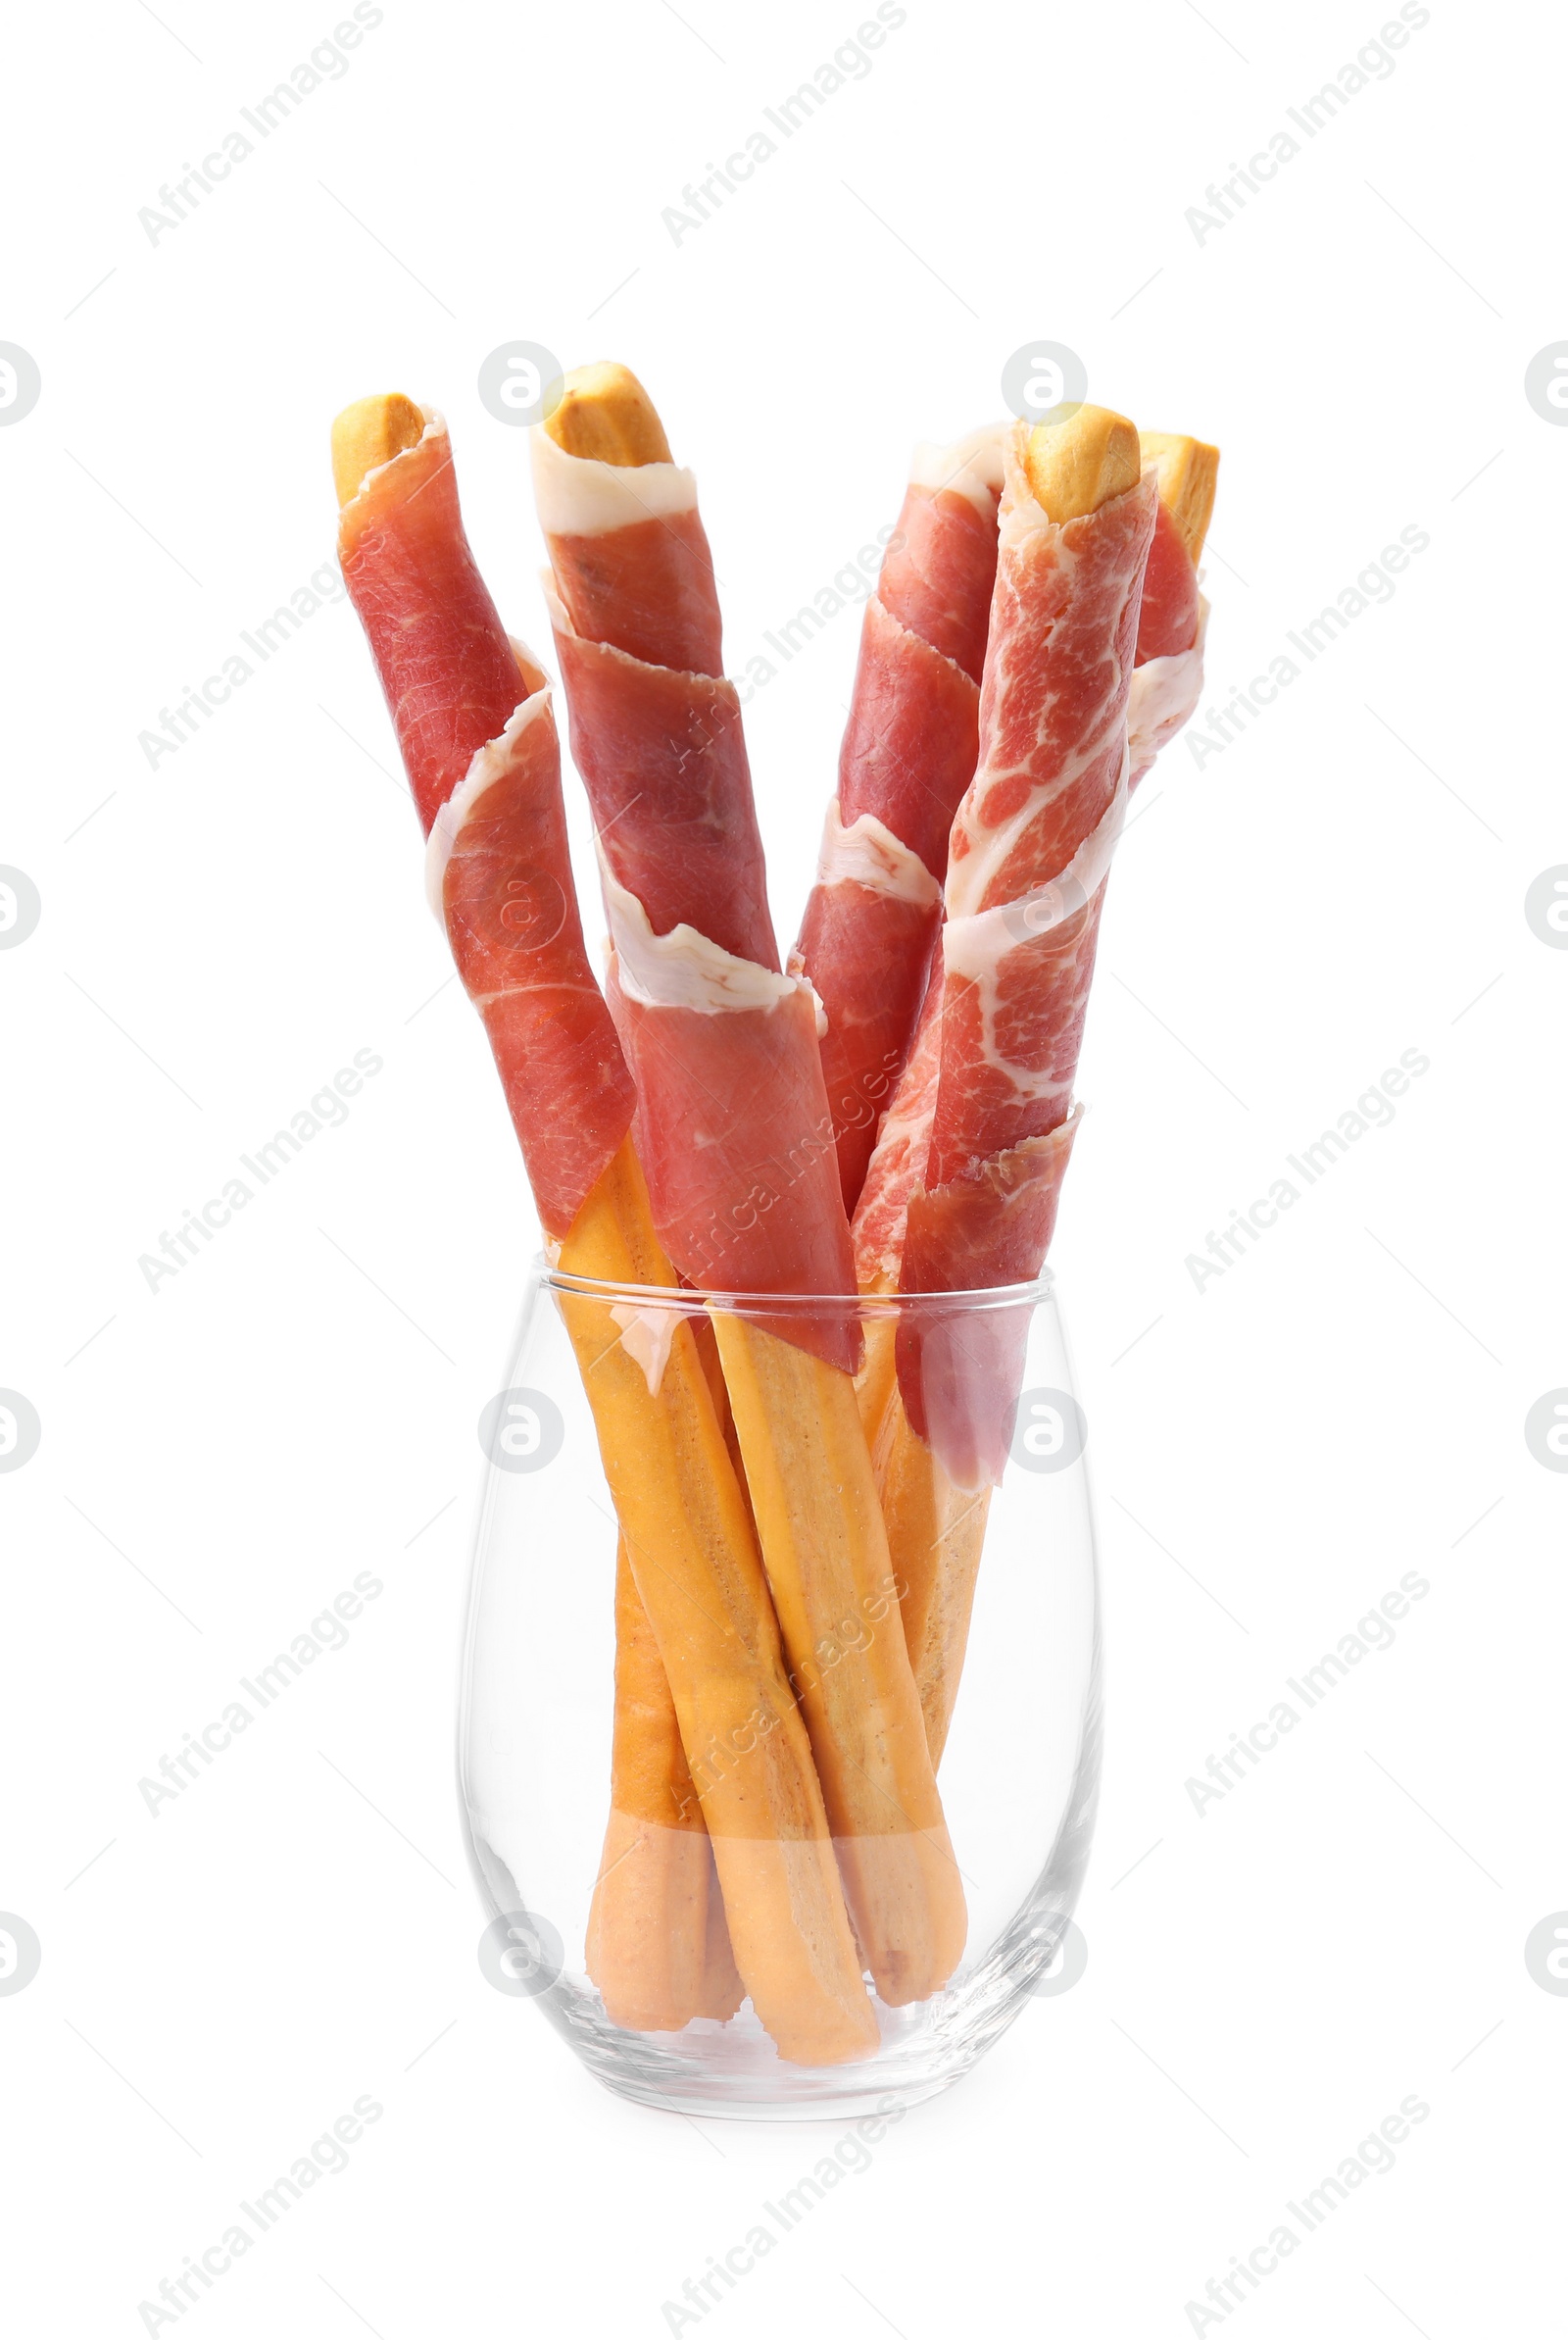 Photo of Tasty grissini sticks with prosciutto in glass isolated on white